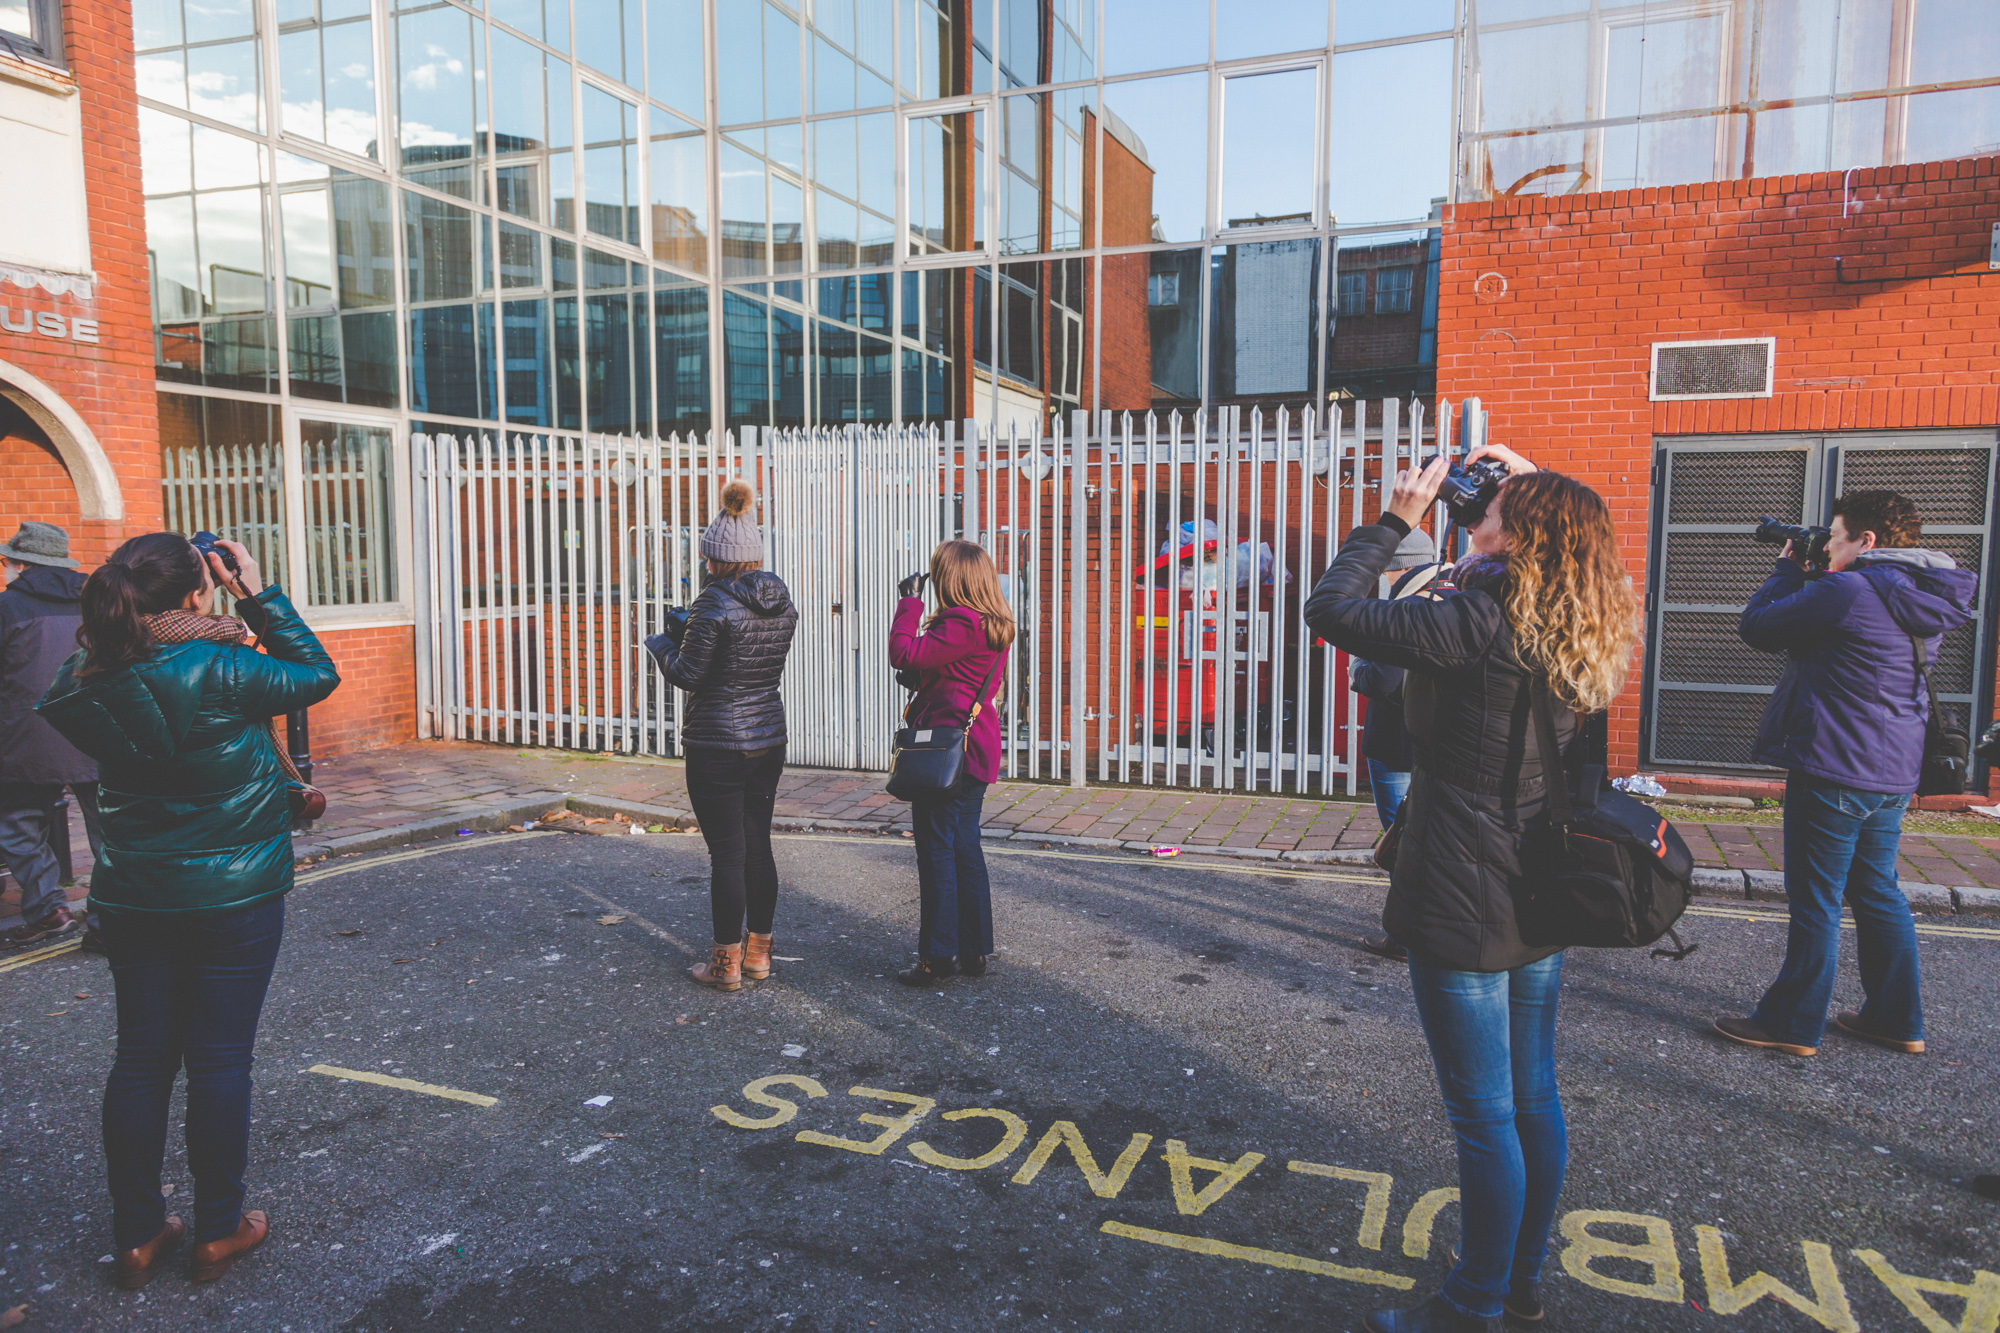 Strong Island Photography Walkshop - Portsmouth City Centre